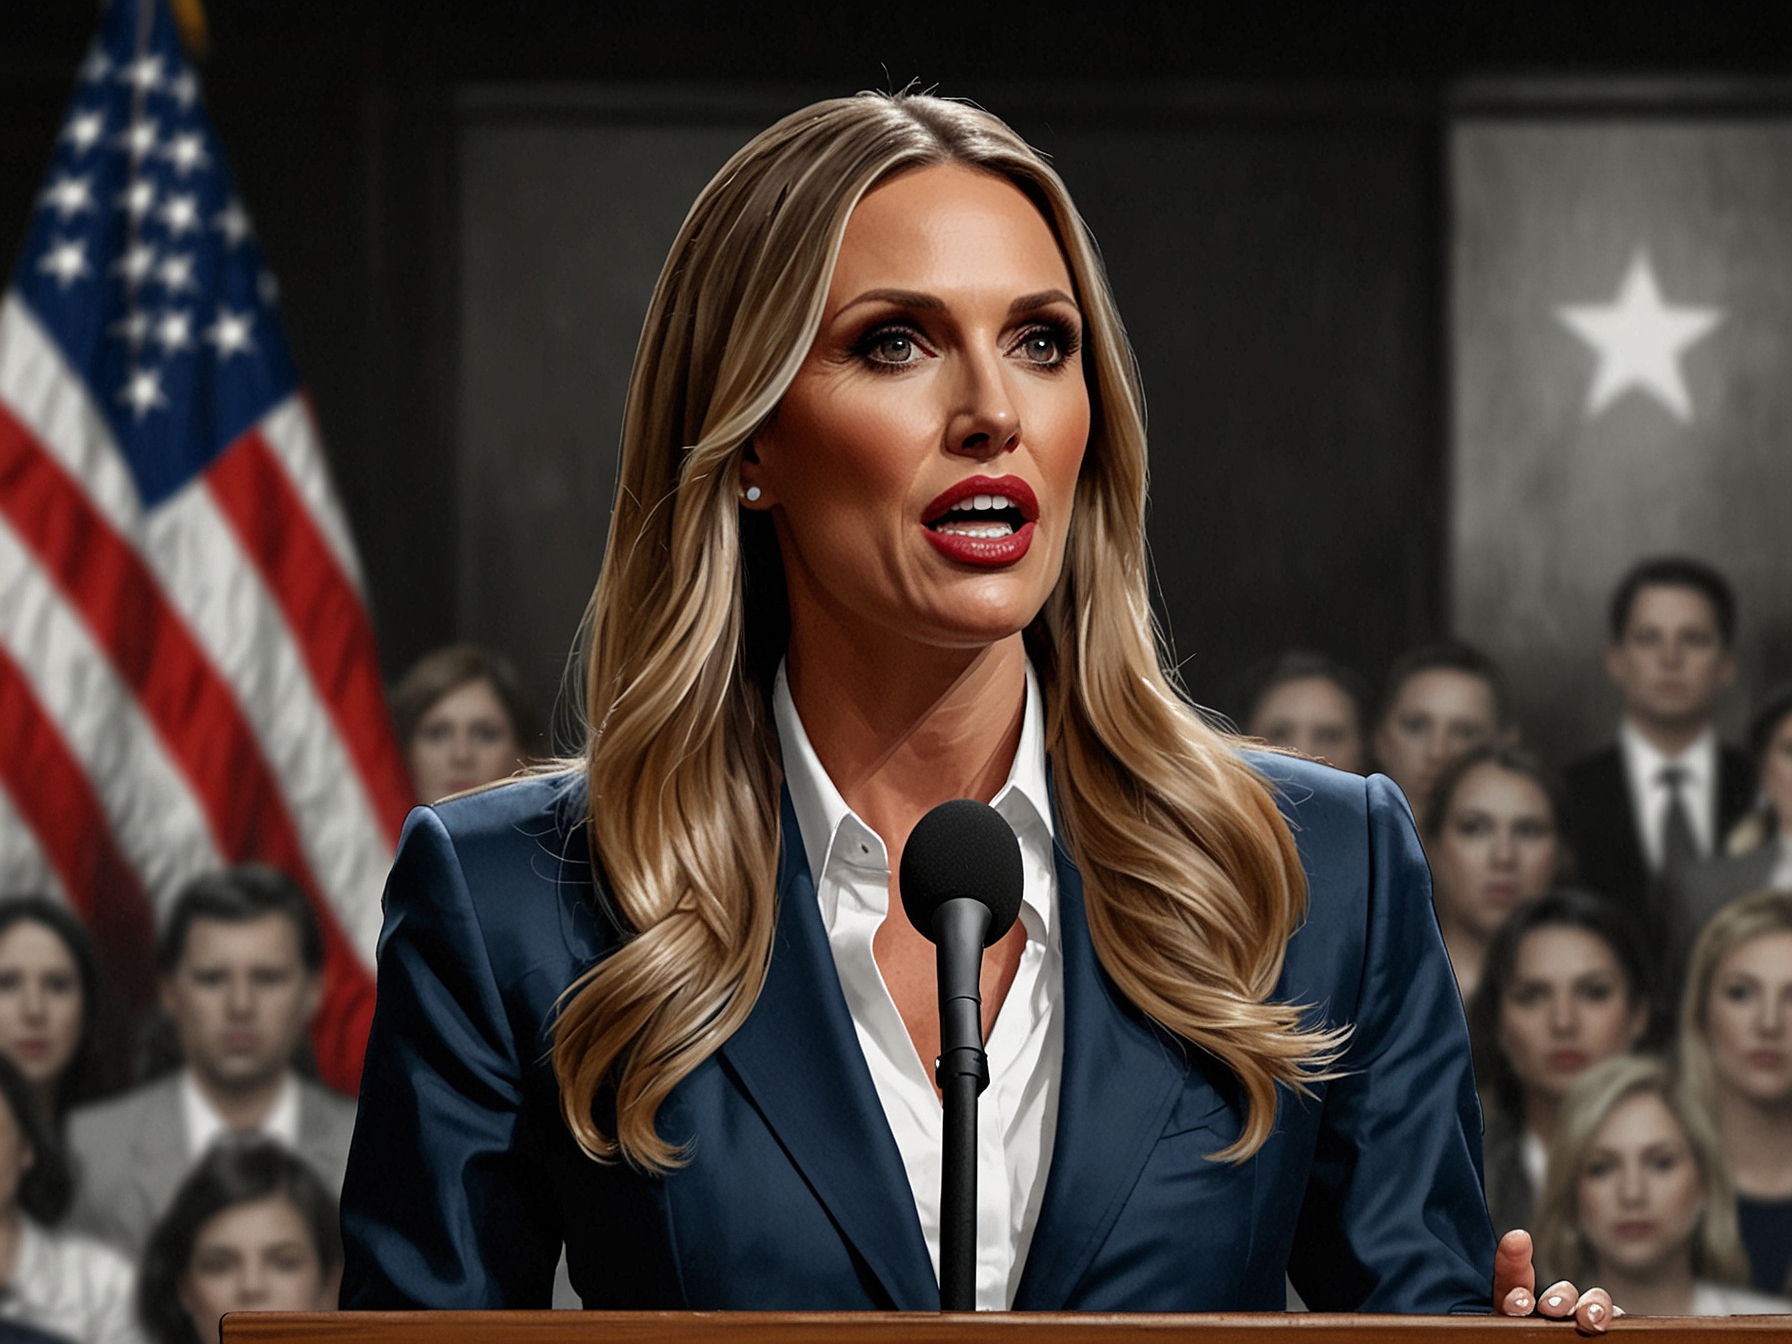 An image showing Lara Trump speaking at a political rally, emphasizing her points about the differences between the GOP and Democratic Party, to illustrate her controversial statements.